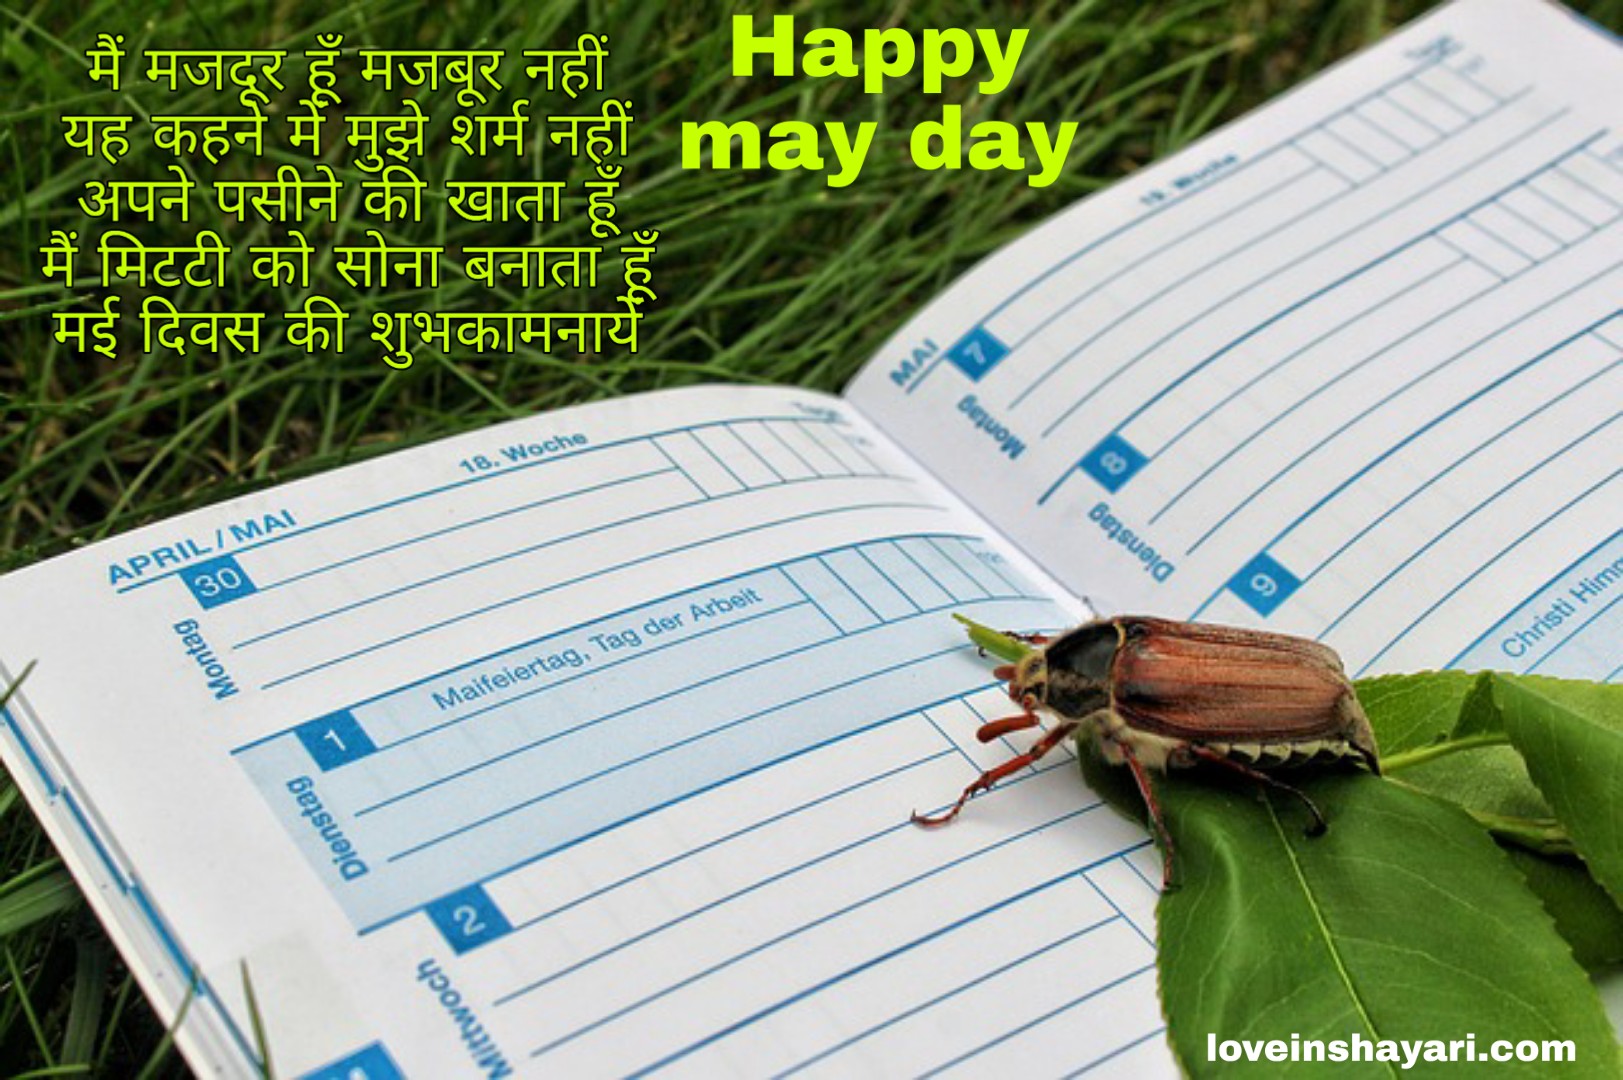 May day wishes shayari quotes messages